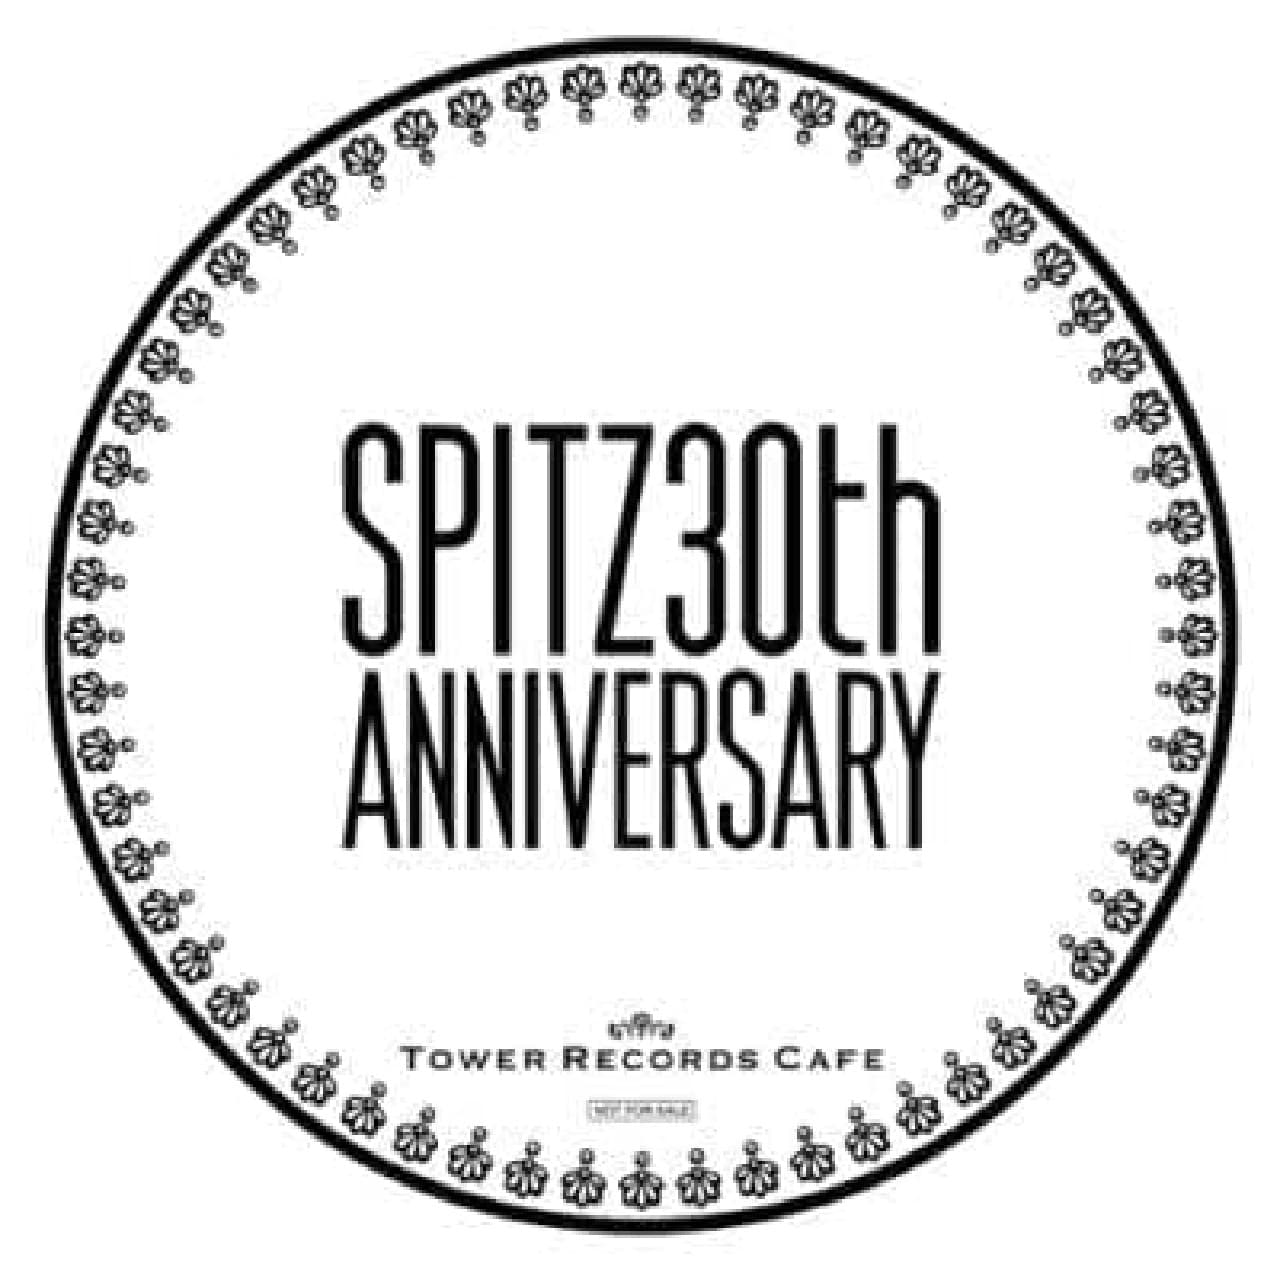 "SPITZ 30th ANNIVERSARY CAFE" is a cafe held to commemorate the release of all Spitz singles, which is celebrating its 30th anniversary.